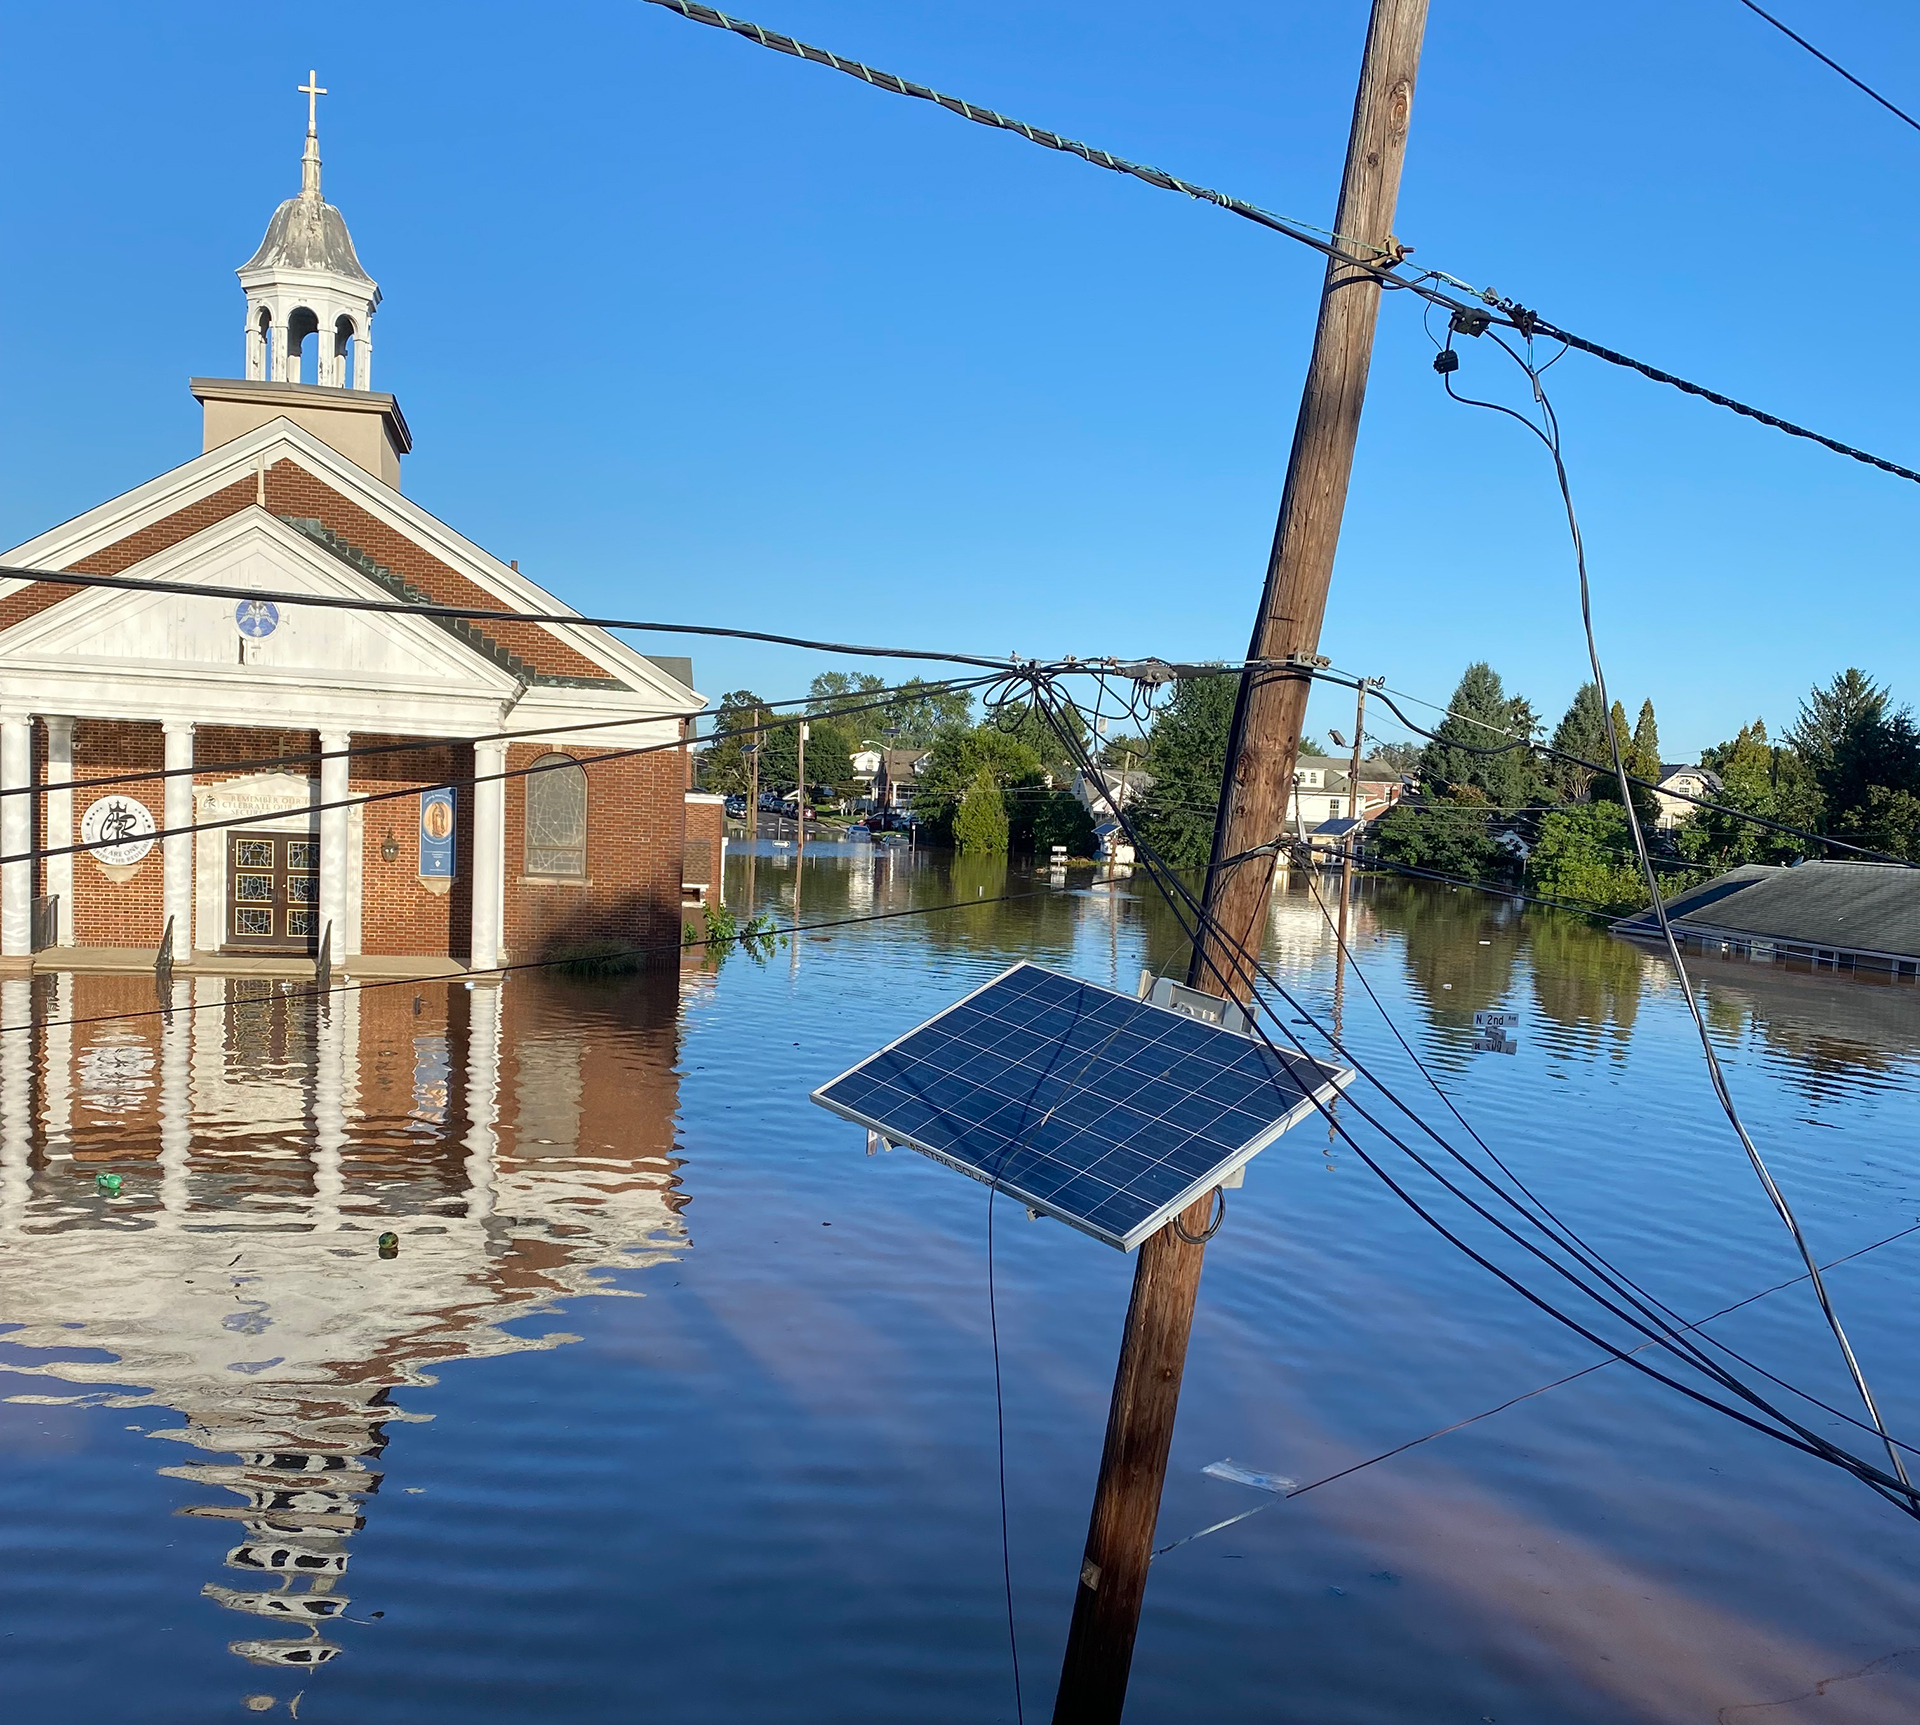 Christ the Redeemer Roman Catholic Church in Manville surrounded by flood waters on Sept. 2, 2021. (Photo by Kaylee Sugot)